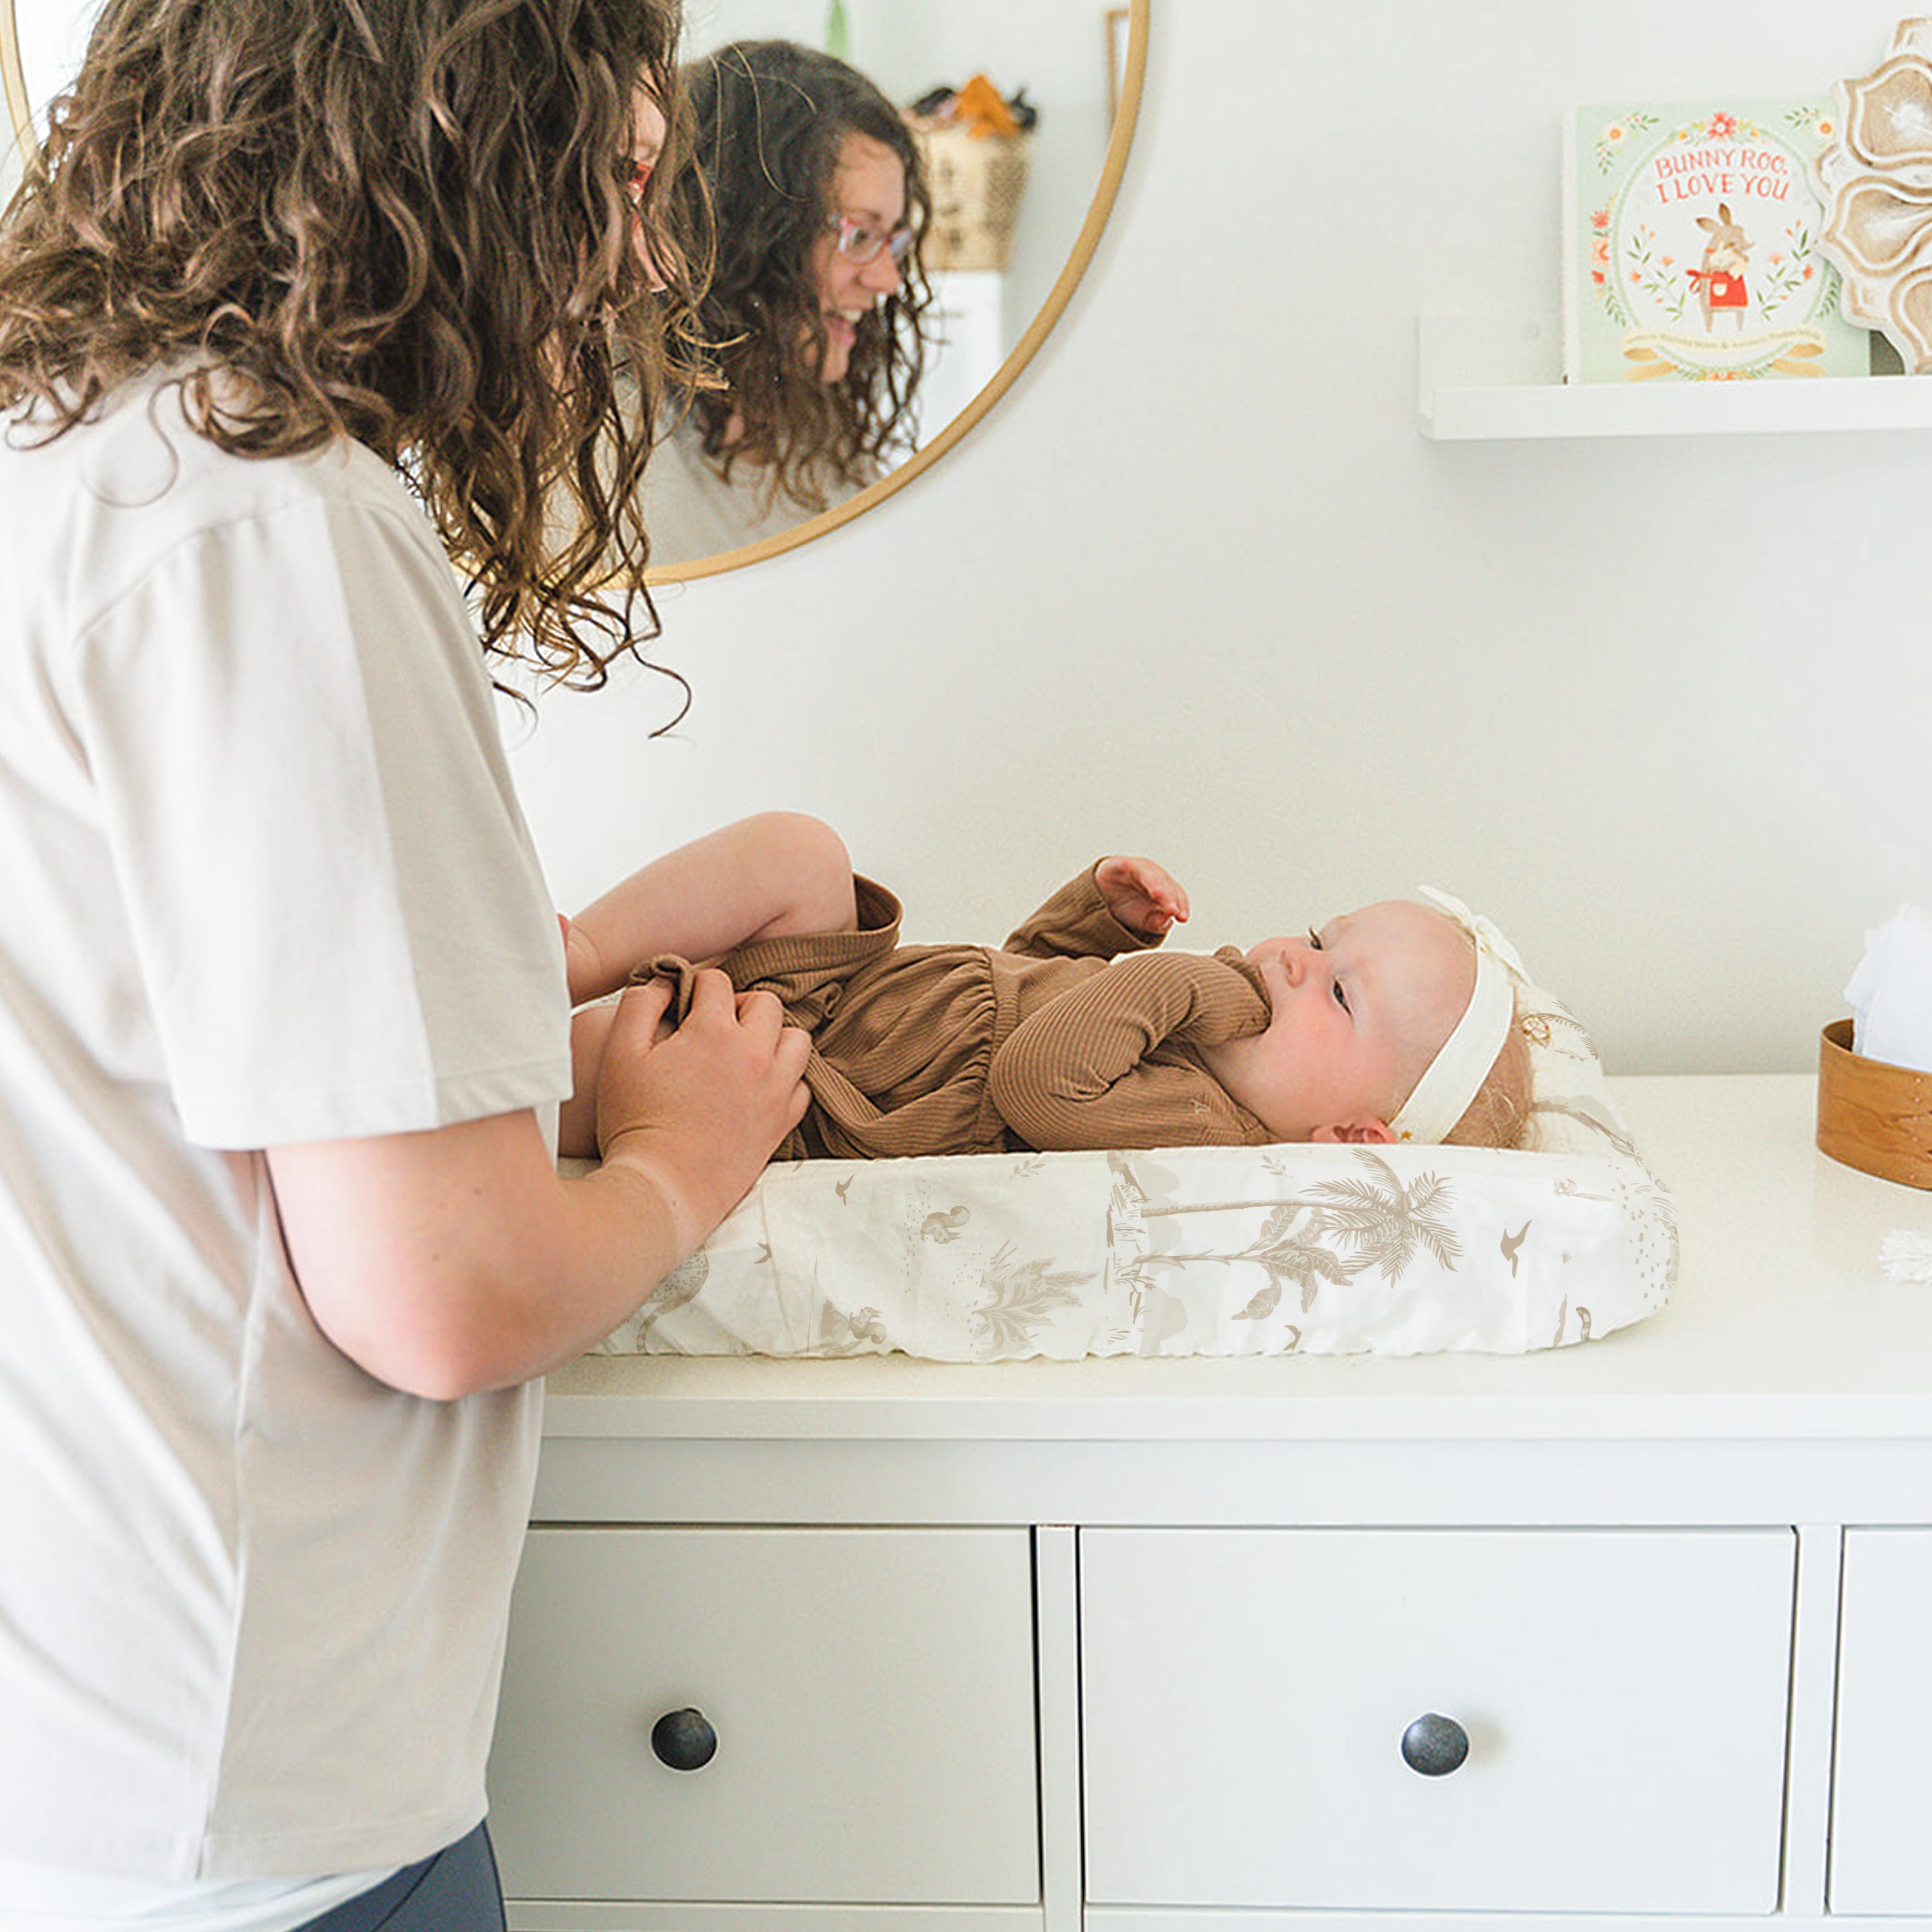 A woman engaging with a baby lying on a Makemake Organics Organic Cotton Changing Pad Cover - Safari atop a white dresser. The room is bright, and there's a mirror reflecting the duo's interaction.